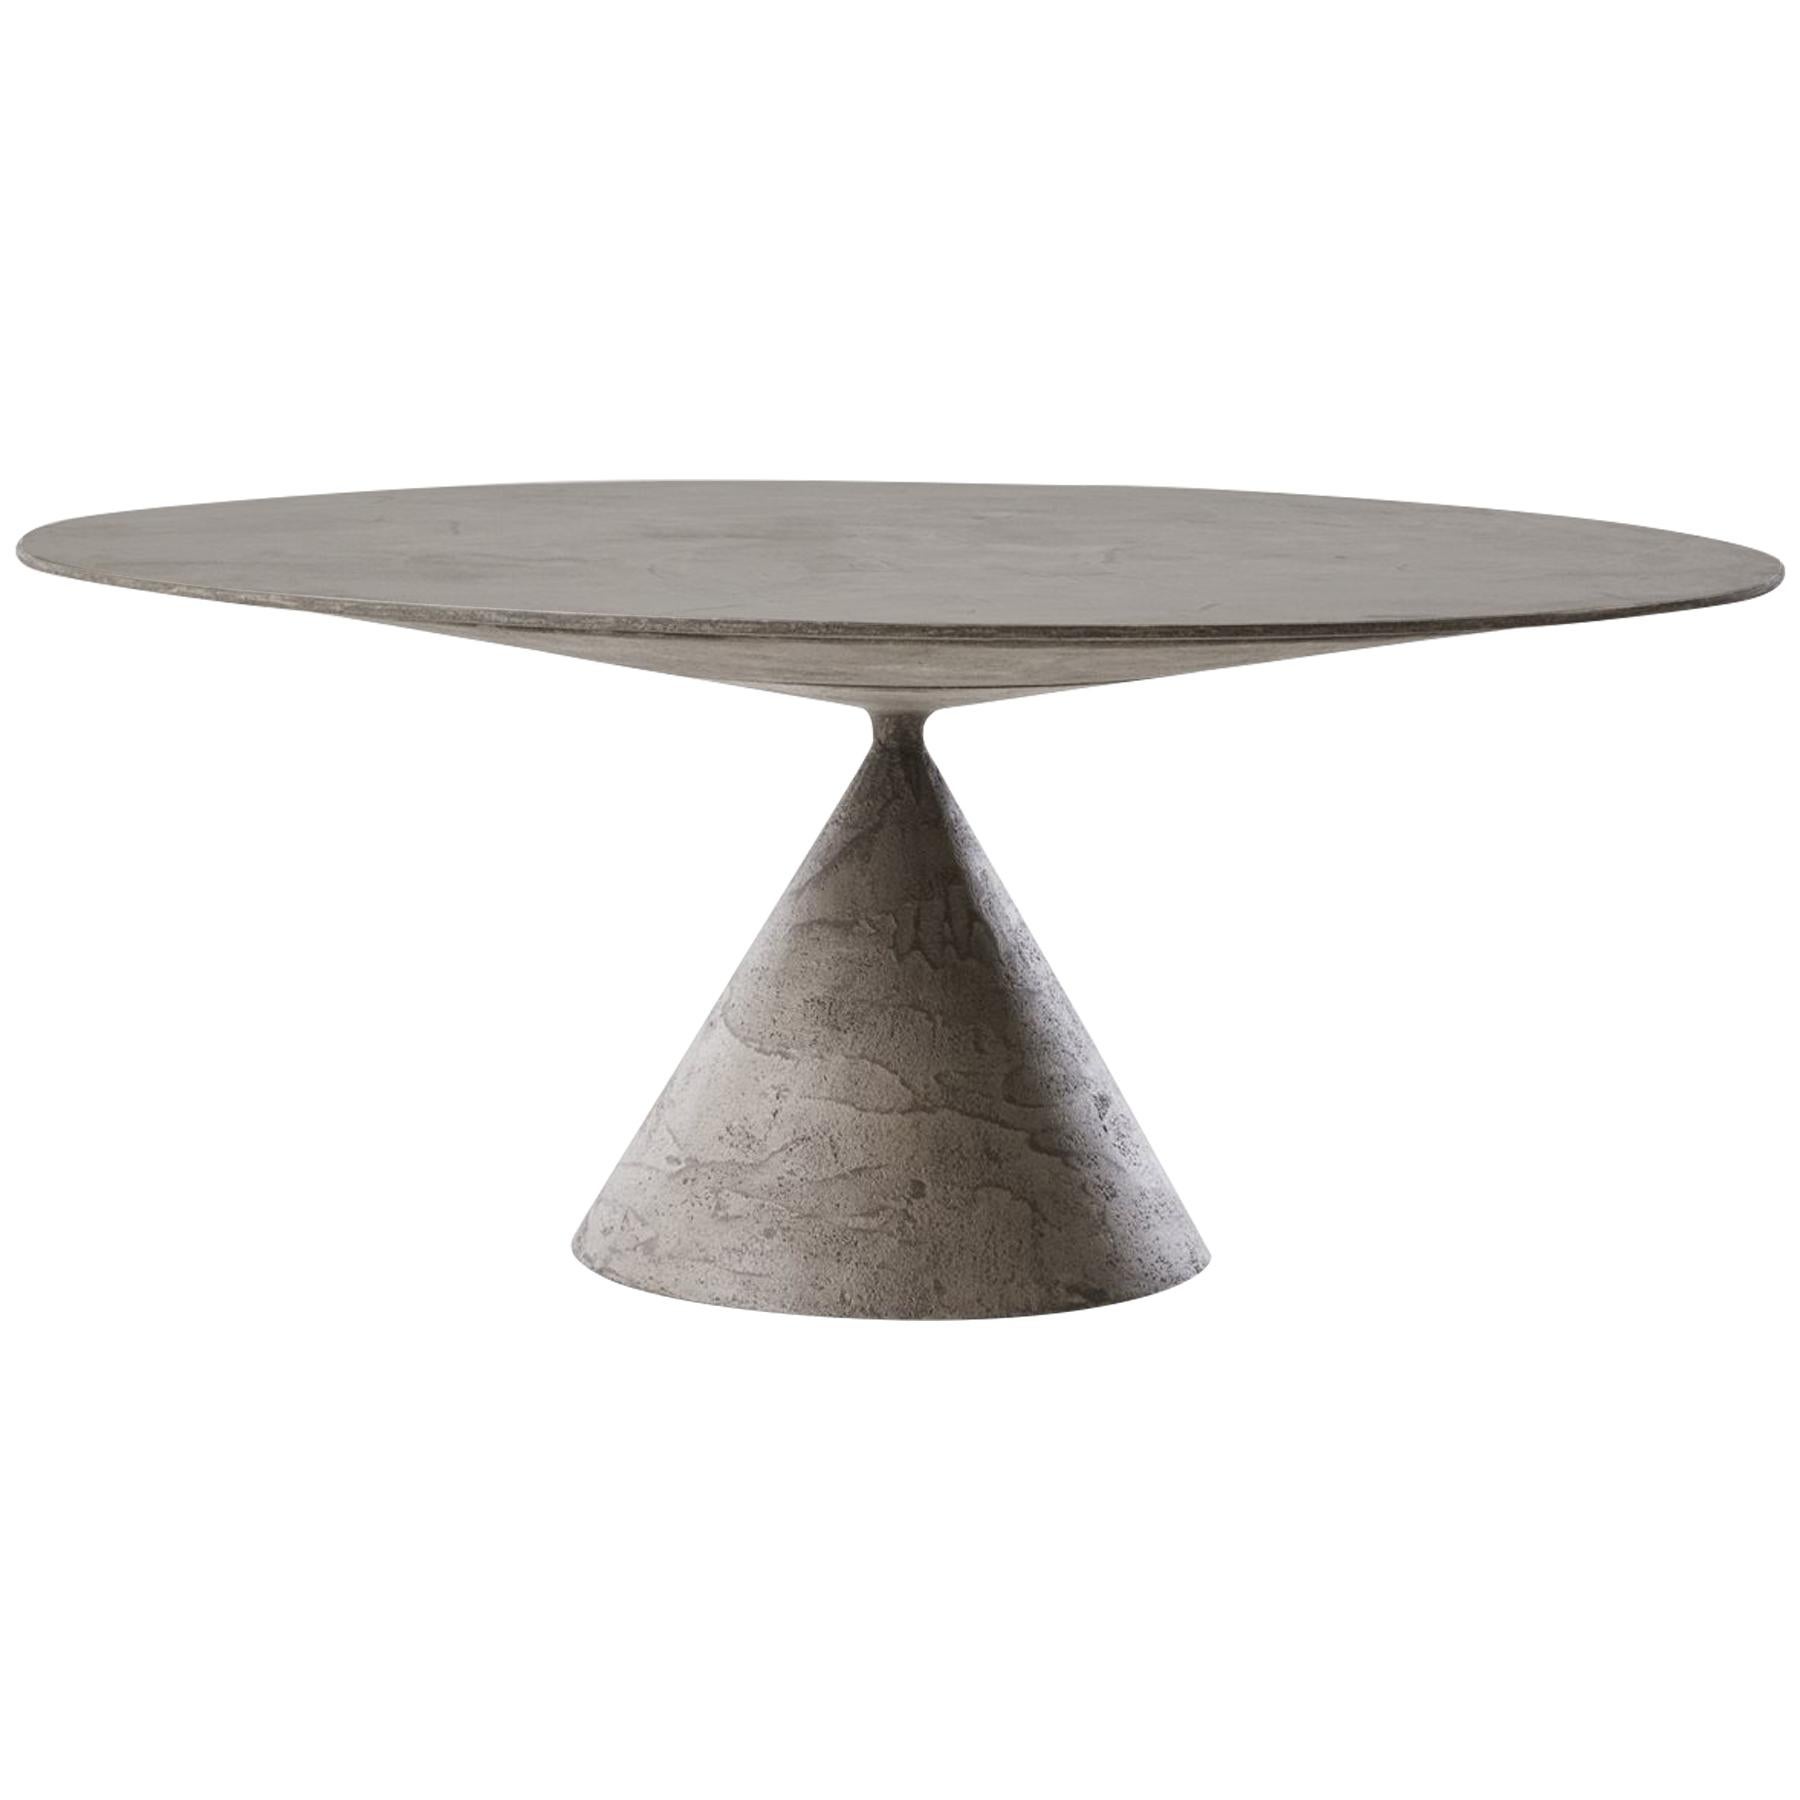 Desalto Clay Oval Table Designed by Marc Krusin